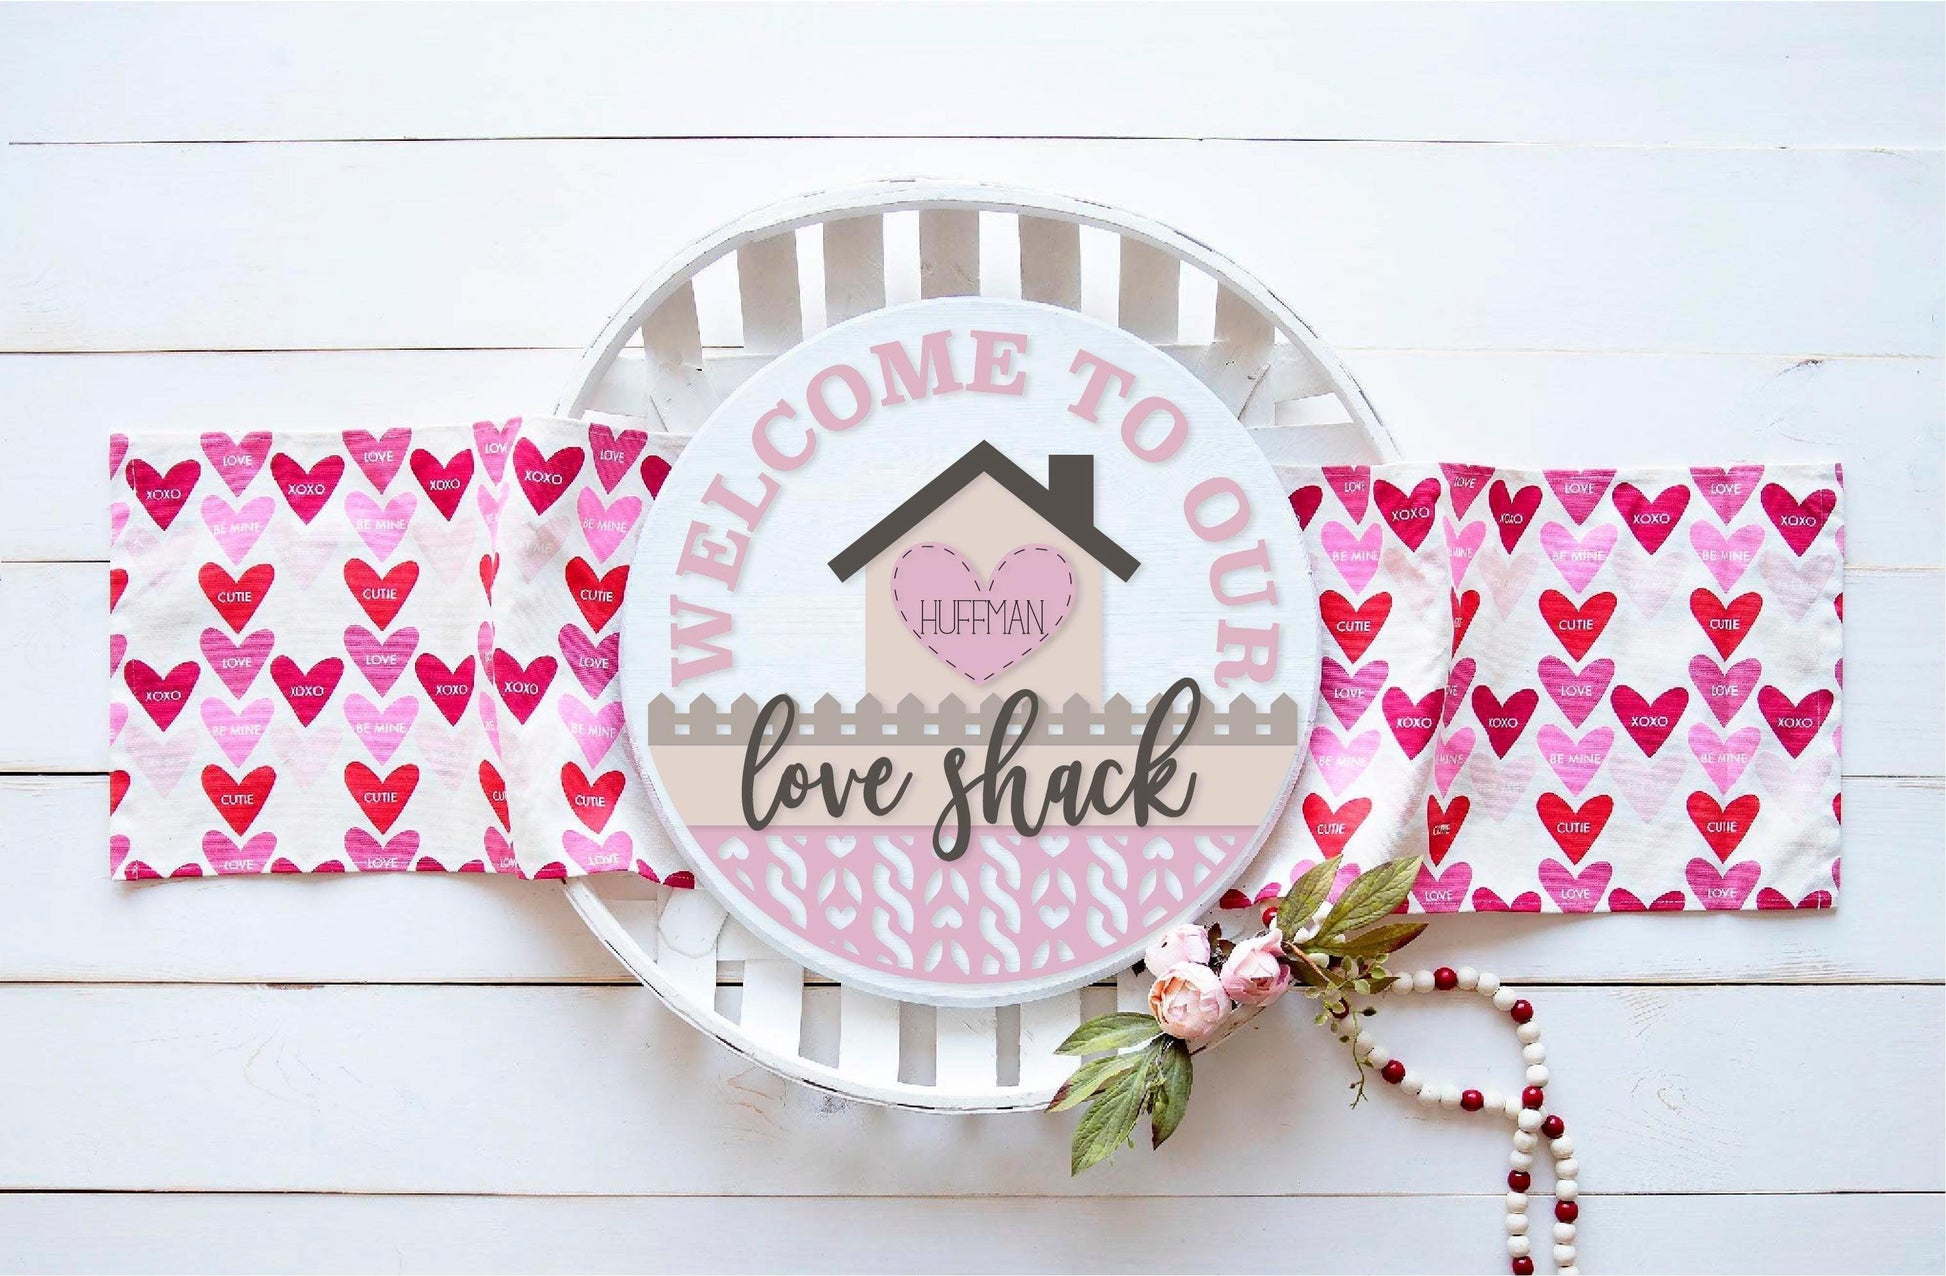 Welcome to our Love Shack Valentines Day Door Hanger DIY - RusticFarmhouseDecor